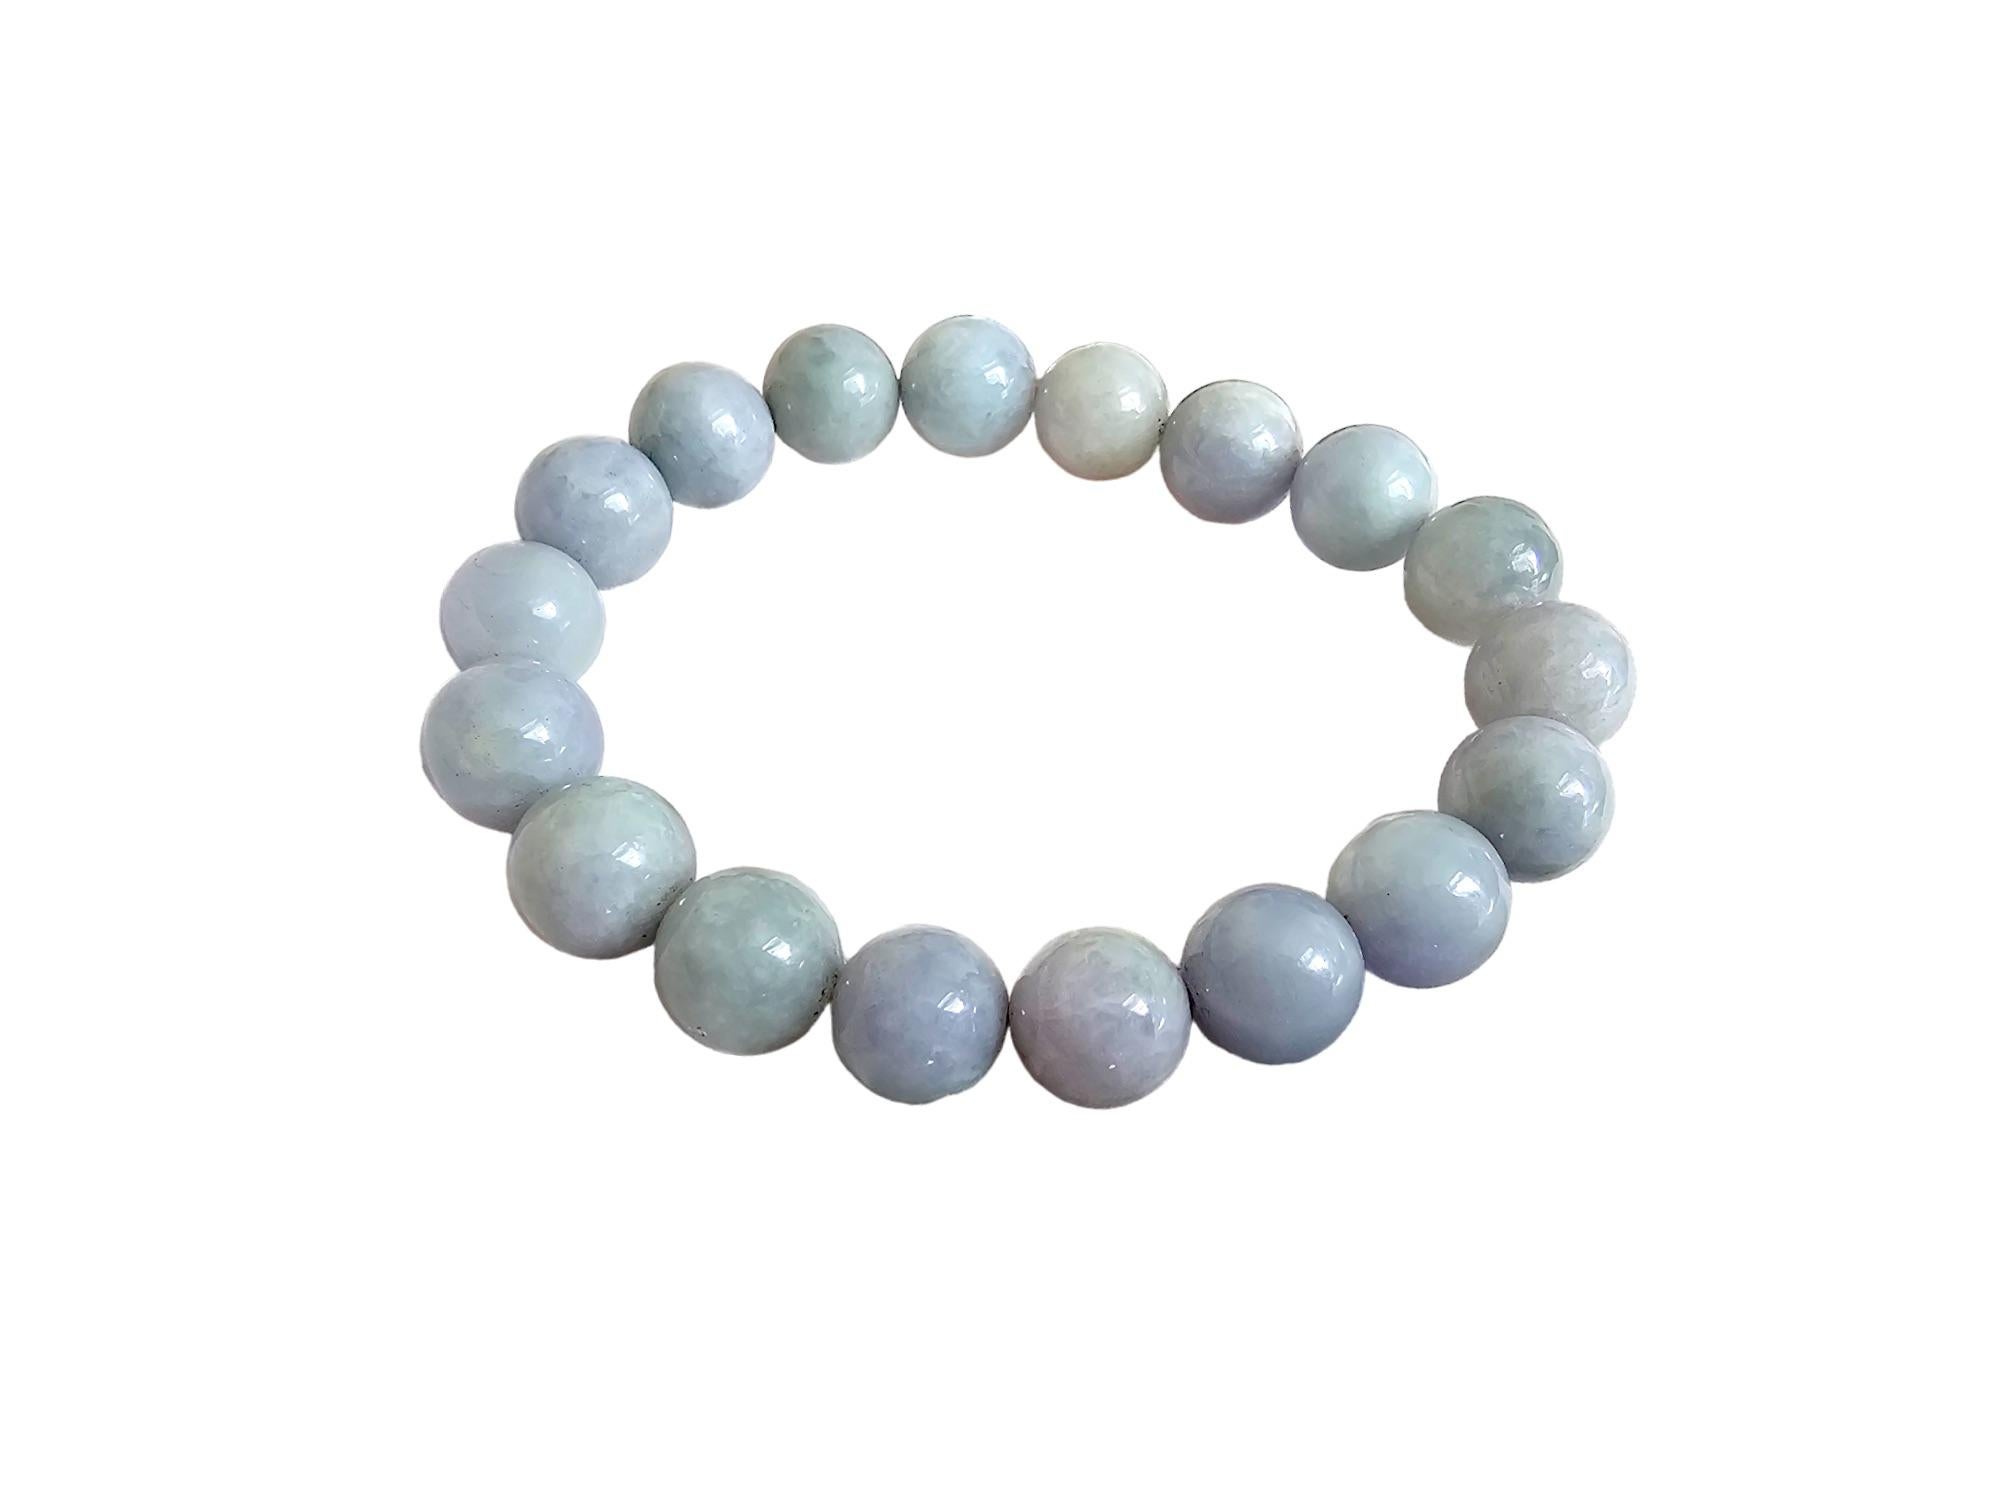 Imperial Purple and Green Lavender Burmese A-Jade Jadeite Beaded Bracelet (10-11mm Each x 18 beads) 06006

10-11mm each, 18 perfectly calibrated Green and Lavender Jadeite Beads. Some of the rarest naturally occurring hues of Jadeite and superior